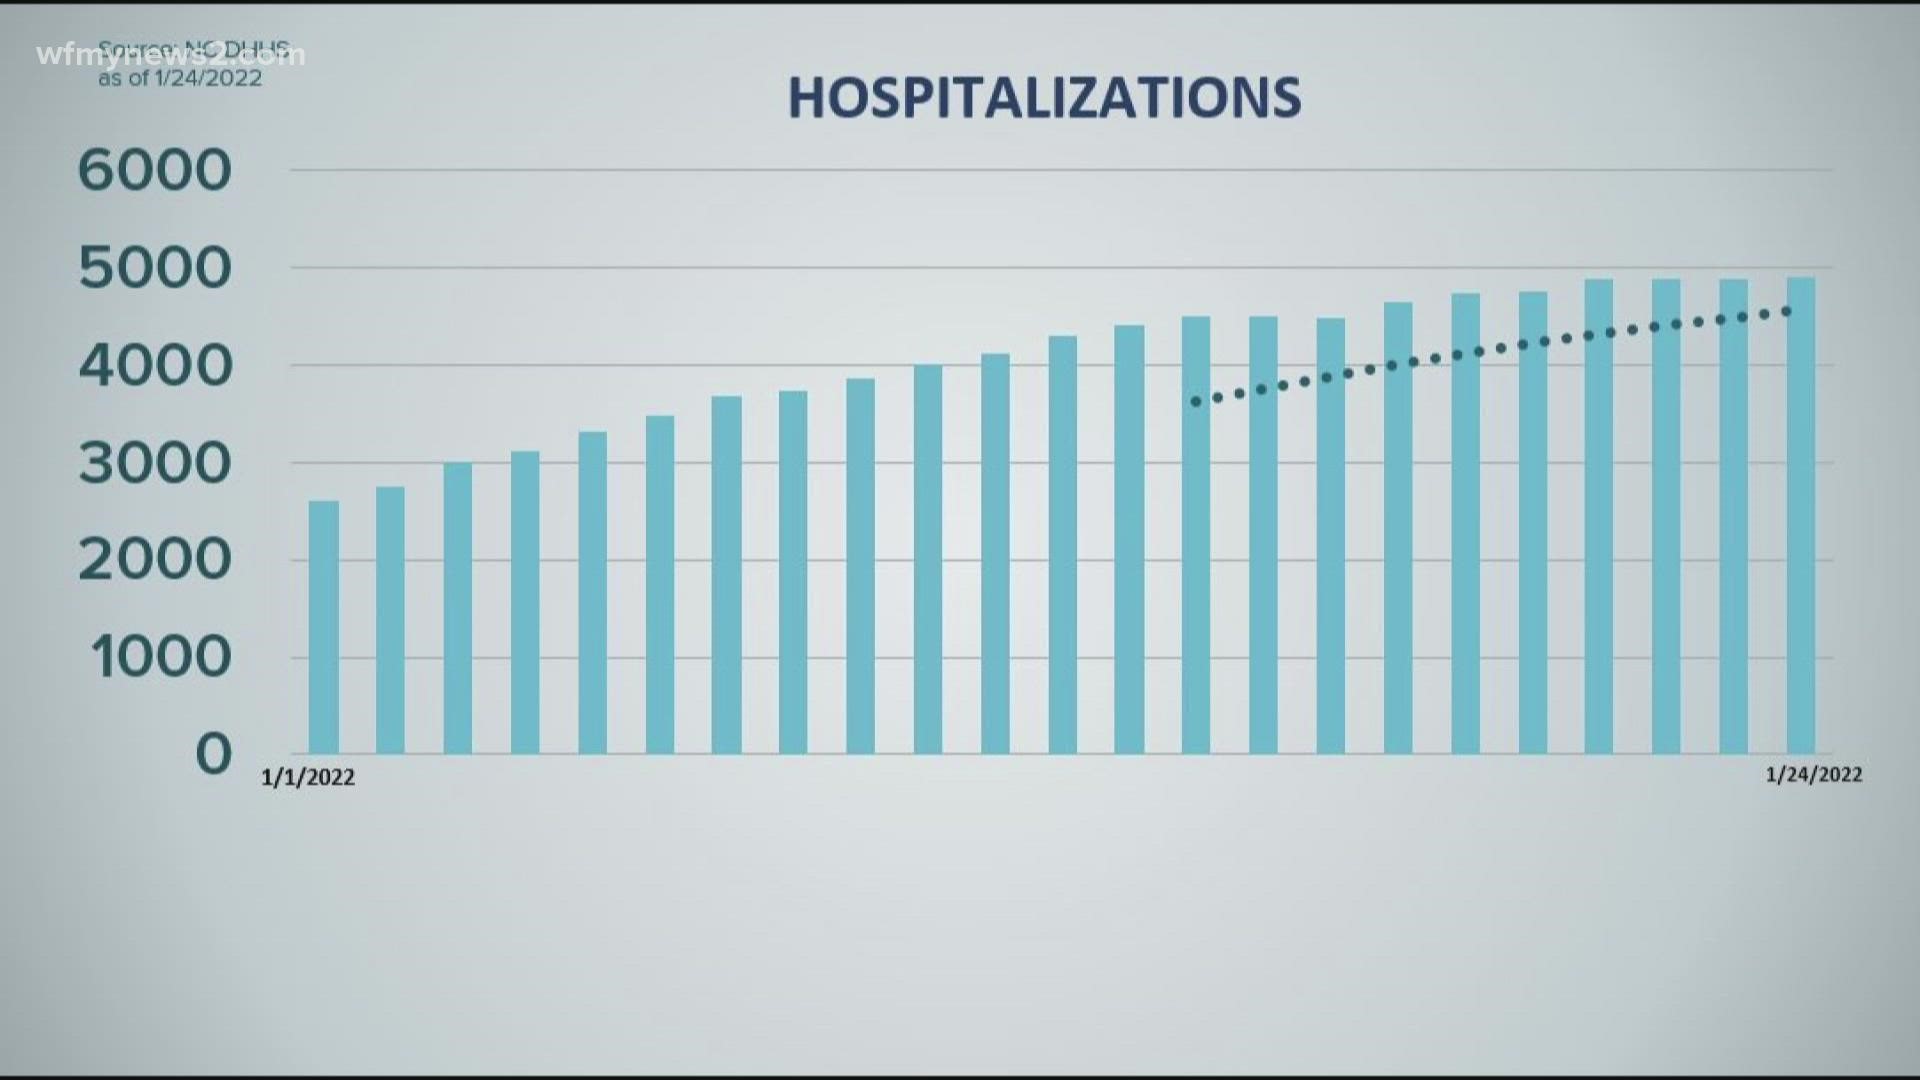 Omicron shows no signs of slowing down yet, though pediatric hospitalizations are dipping slightly this week.